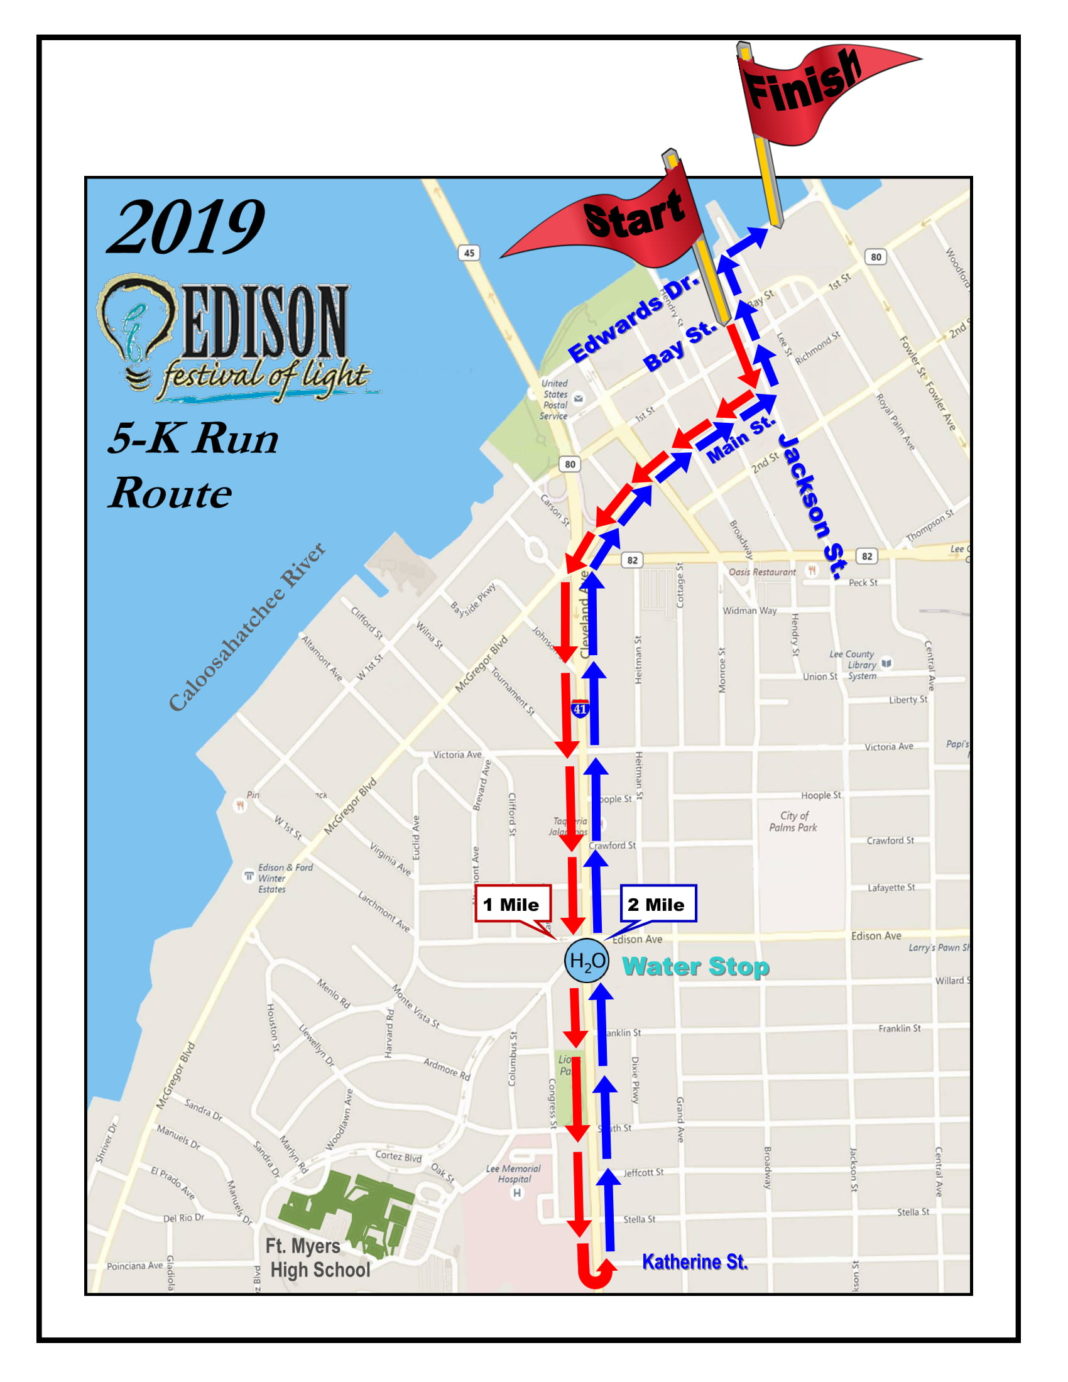 Edison Festival of Light celebration routes and road closures